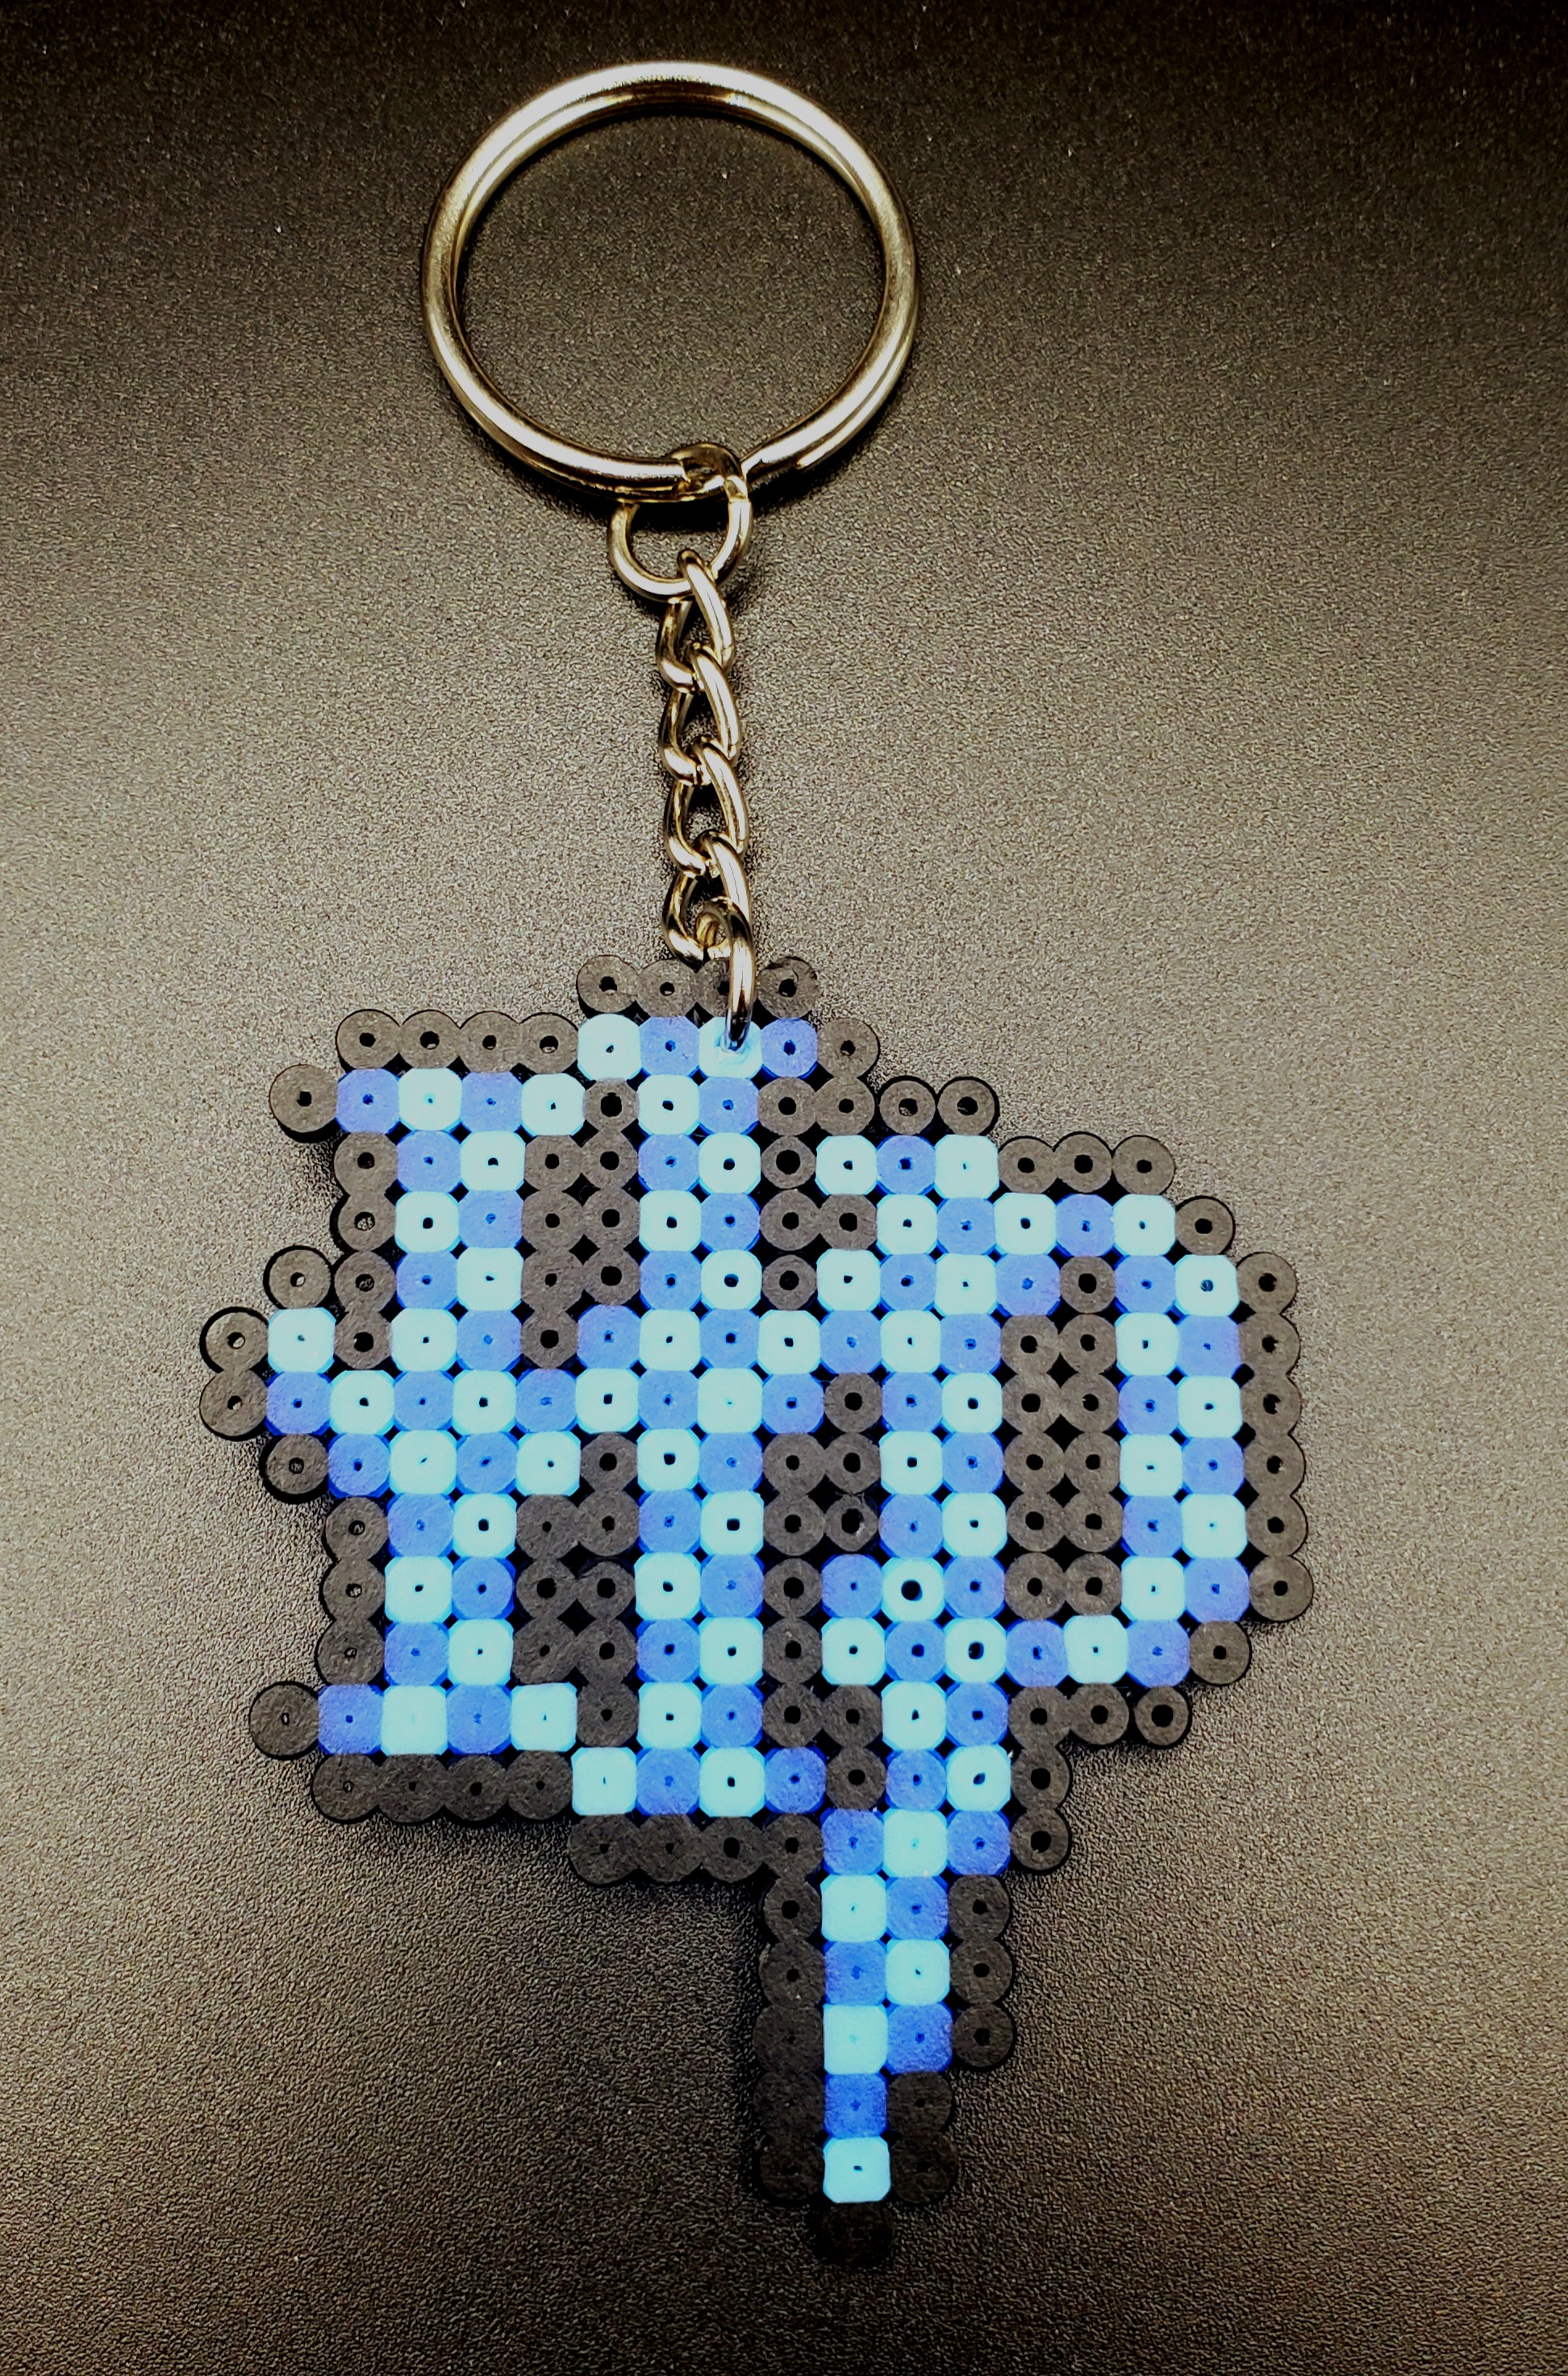 HP Bead Art - Keychain, Magnet, or Necklace